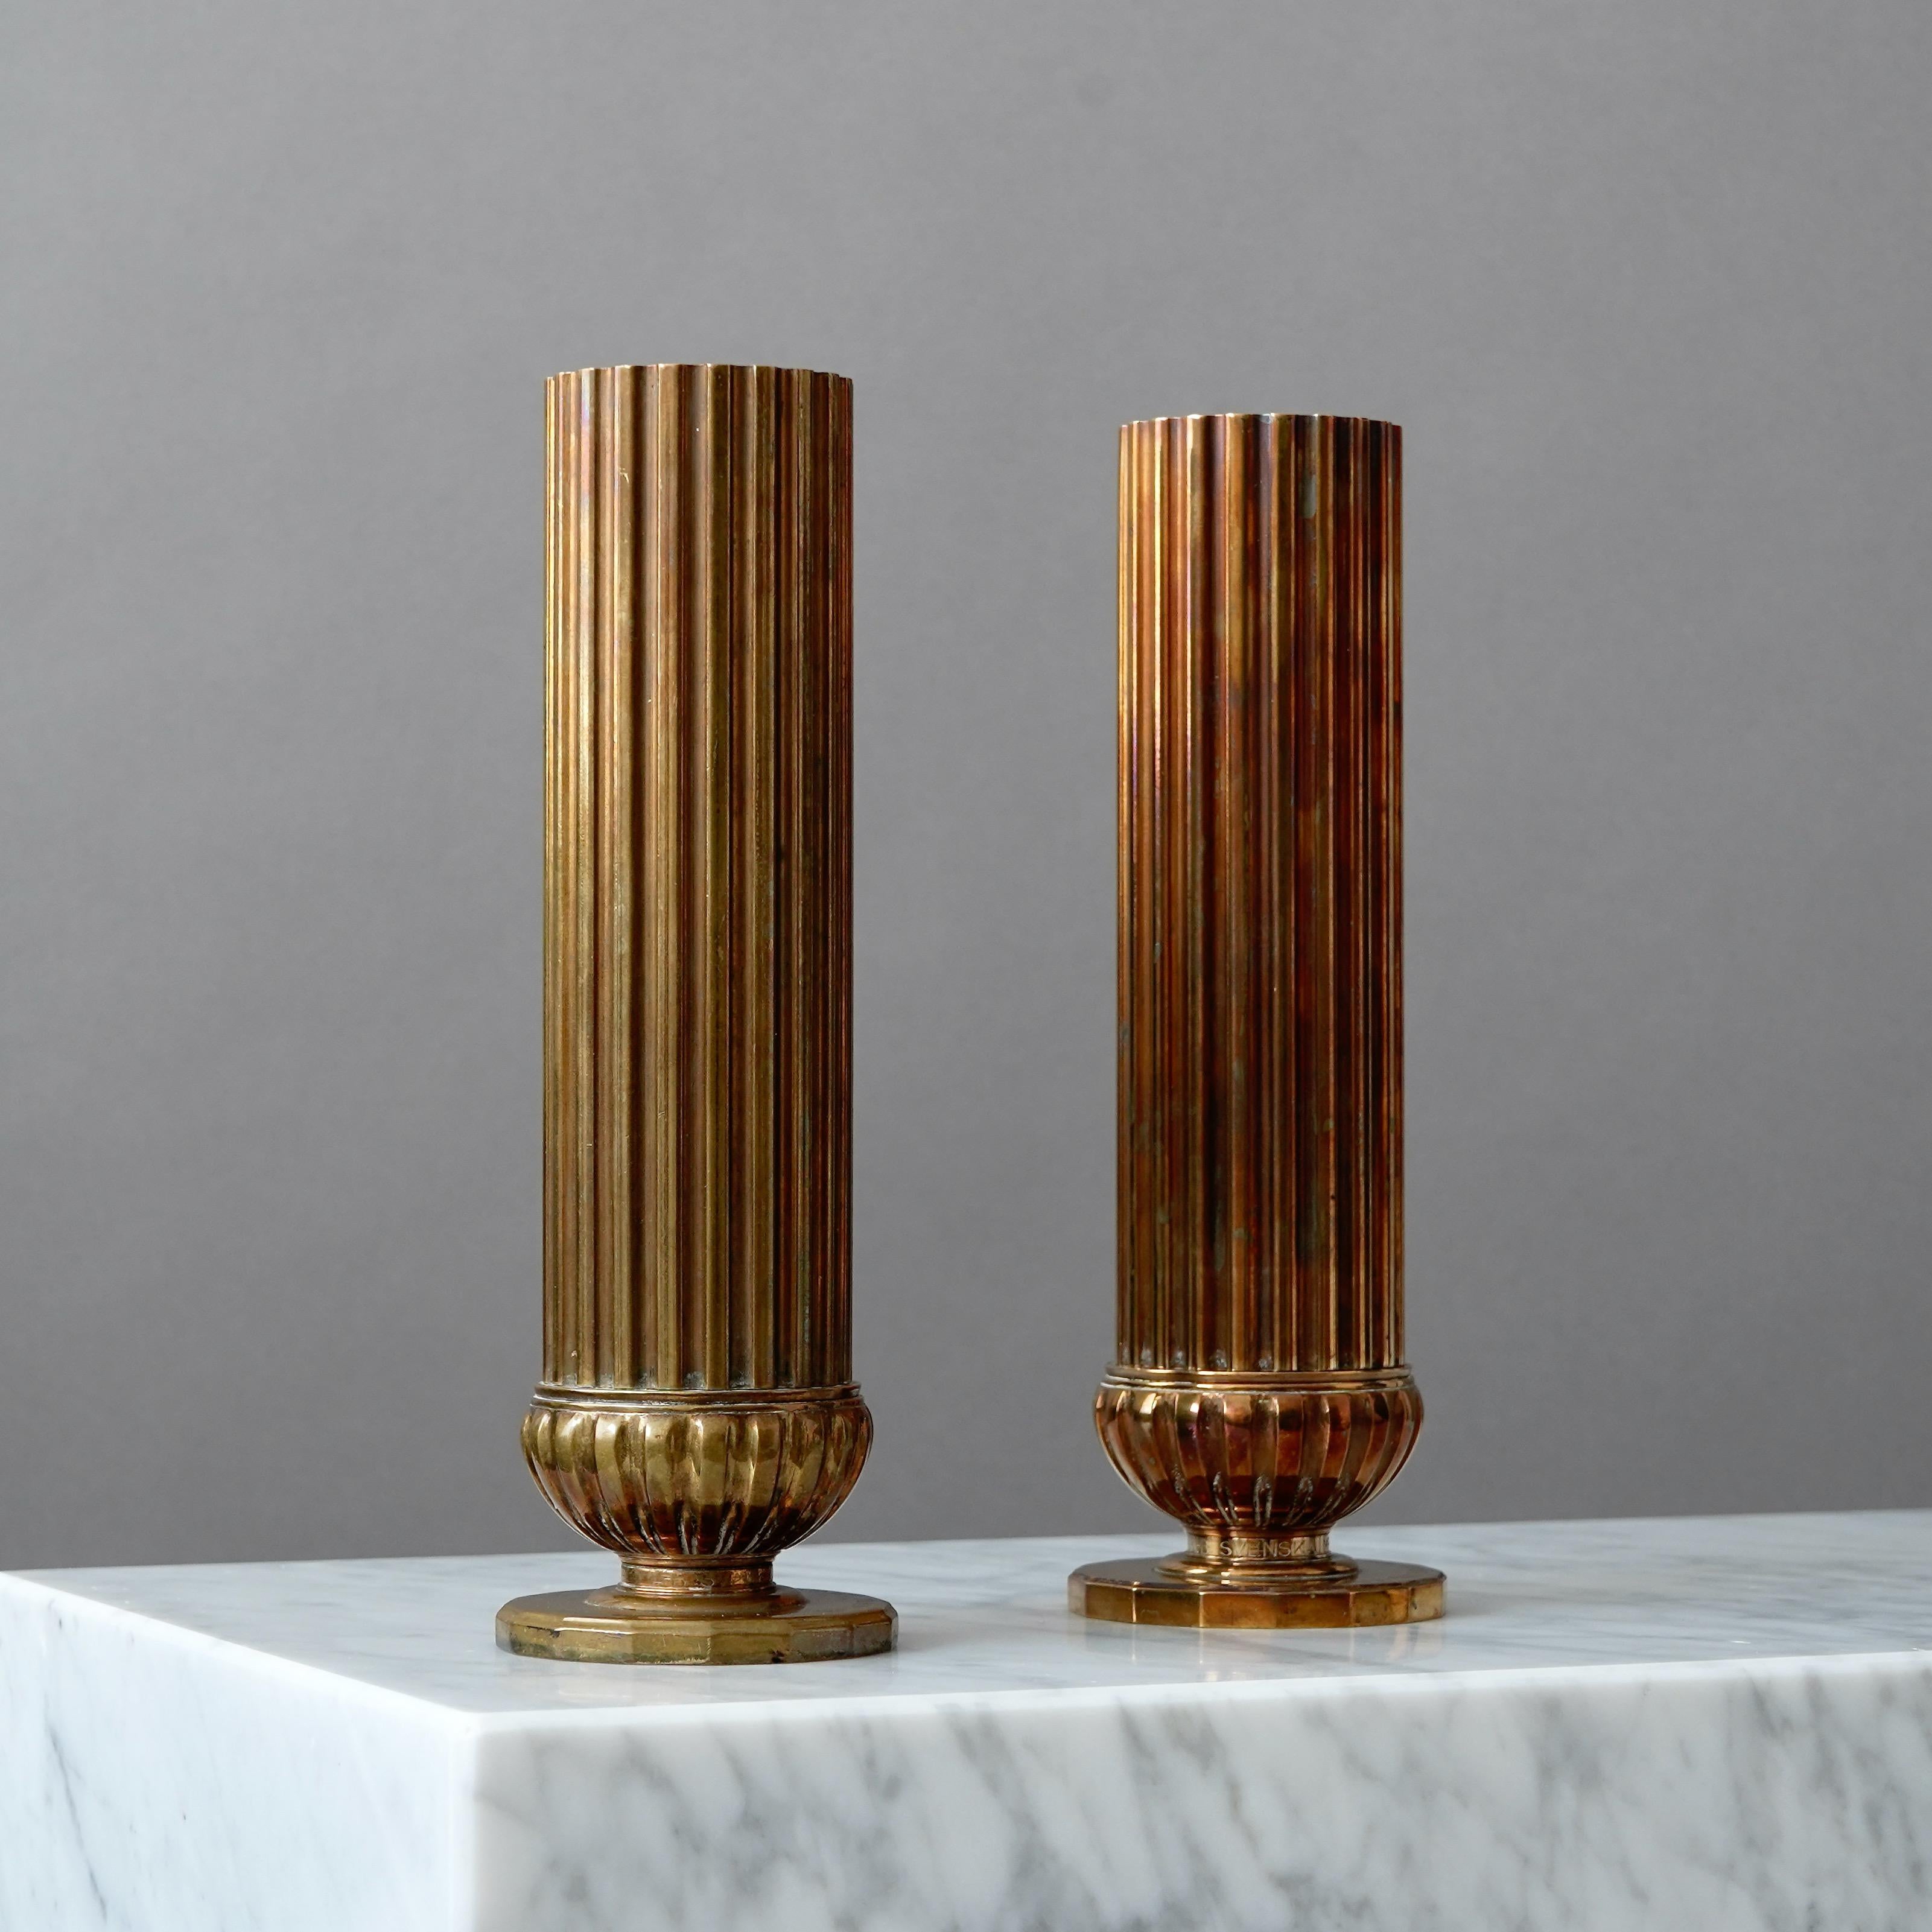 Mid-20th Century A pair of Bronze Art Deco Vases by SVM Handarbete, Sweden, 1930s For Sale